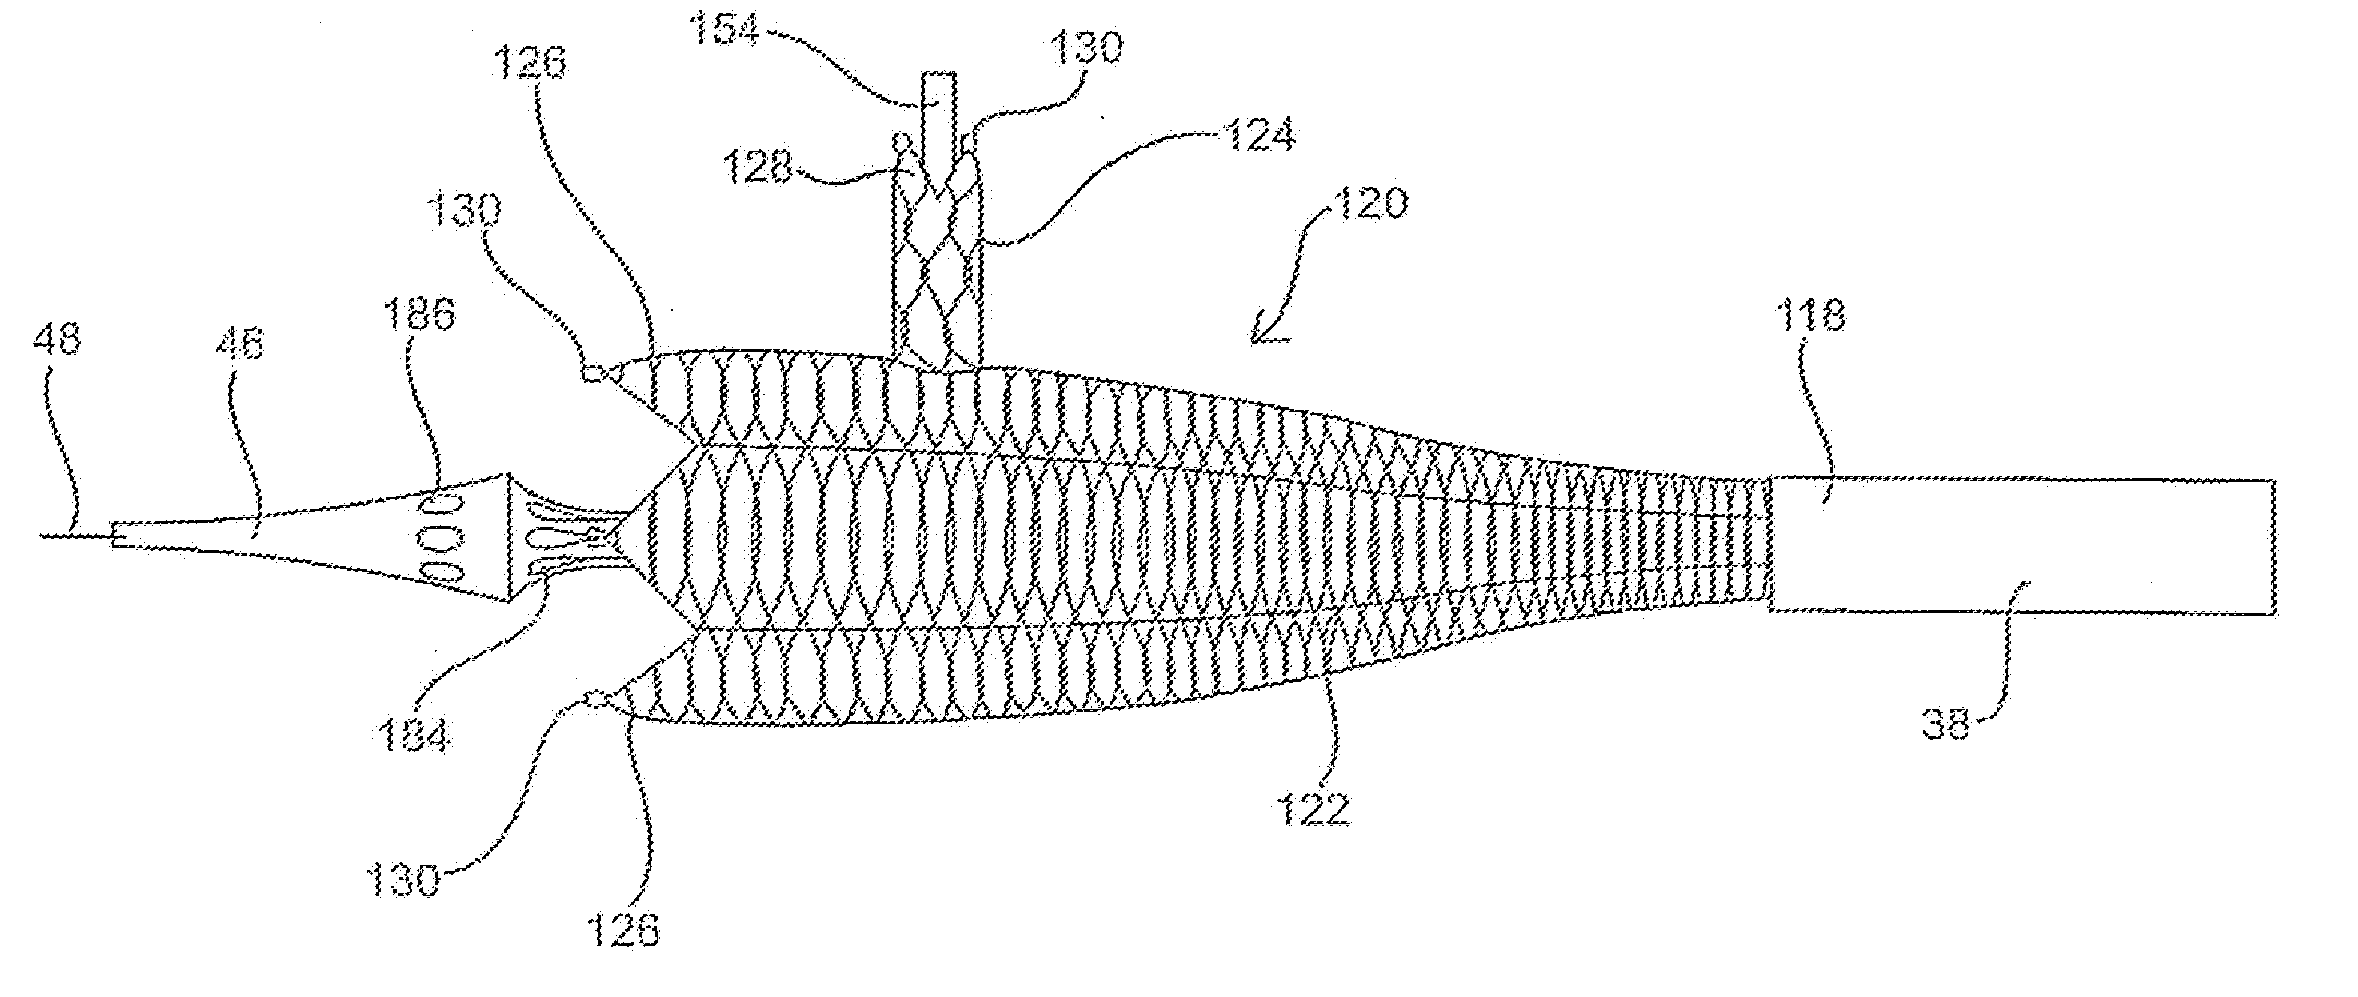 Apparatus and method for deploying an implantable device within the body